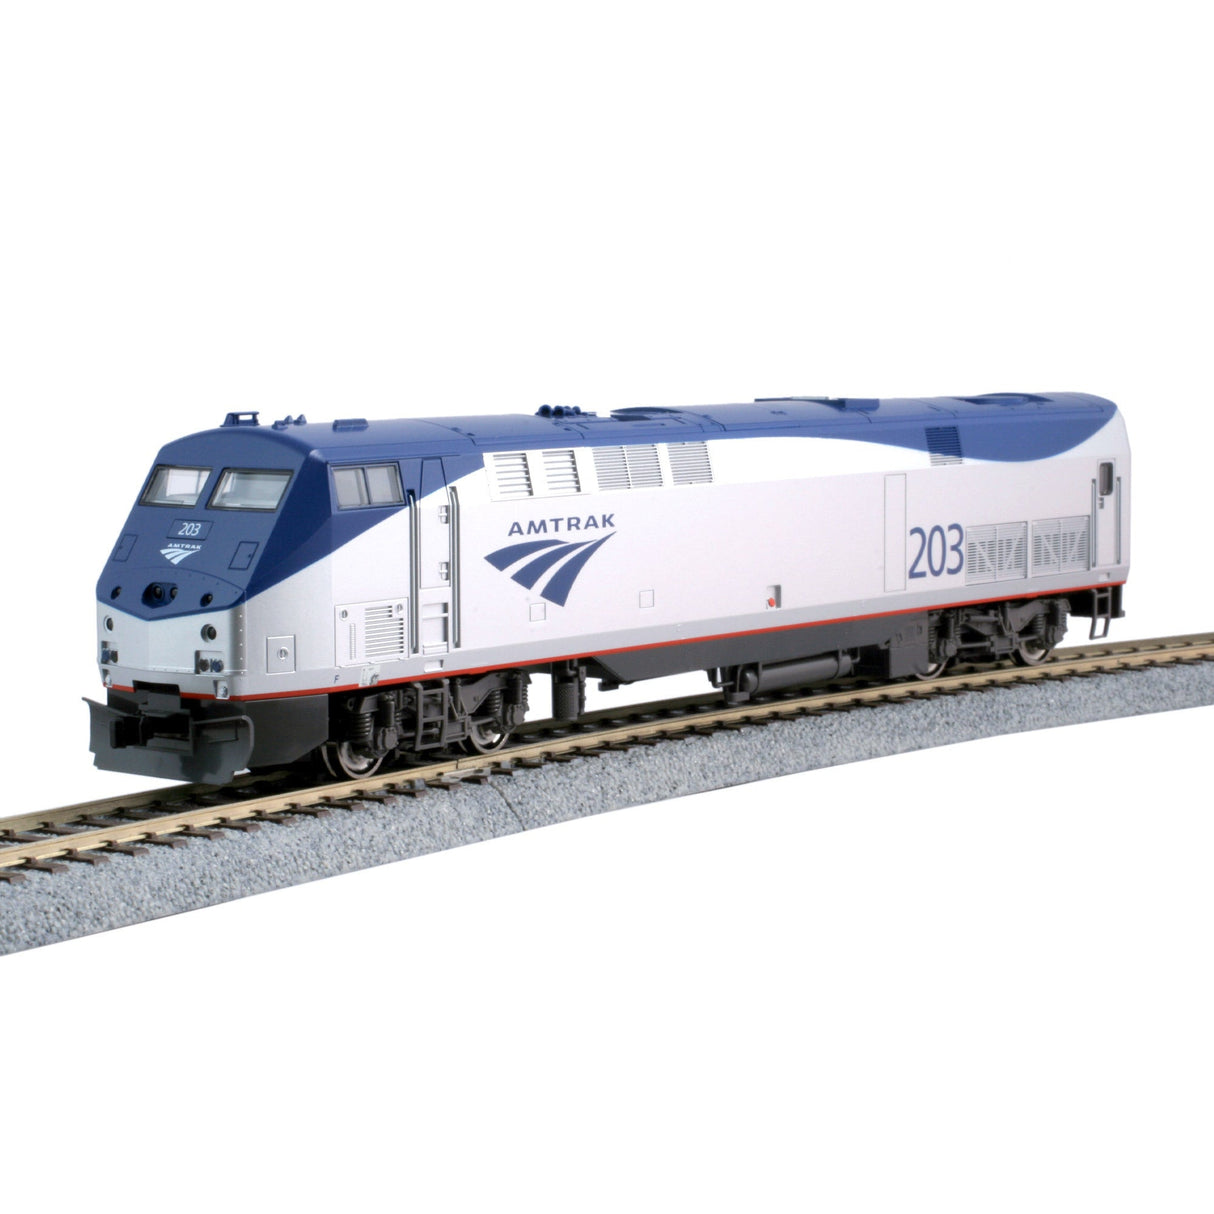 Kato HO Scale P42 Amtrak Phase V Late #180 With Esu LokSound Sound and DCC Decoders